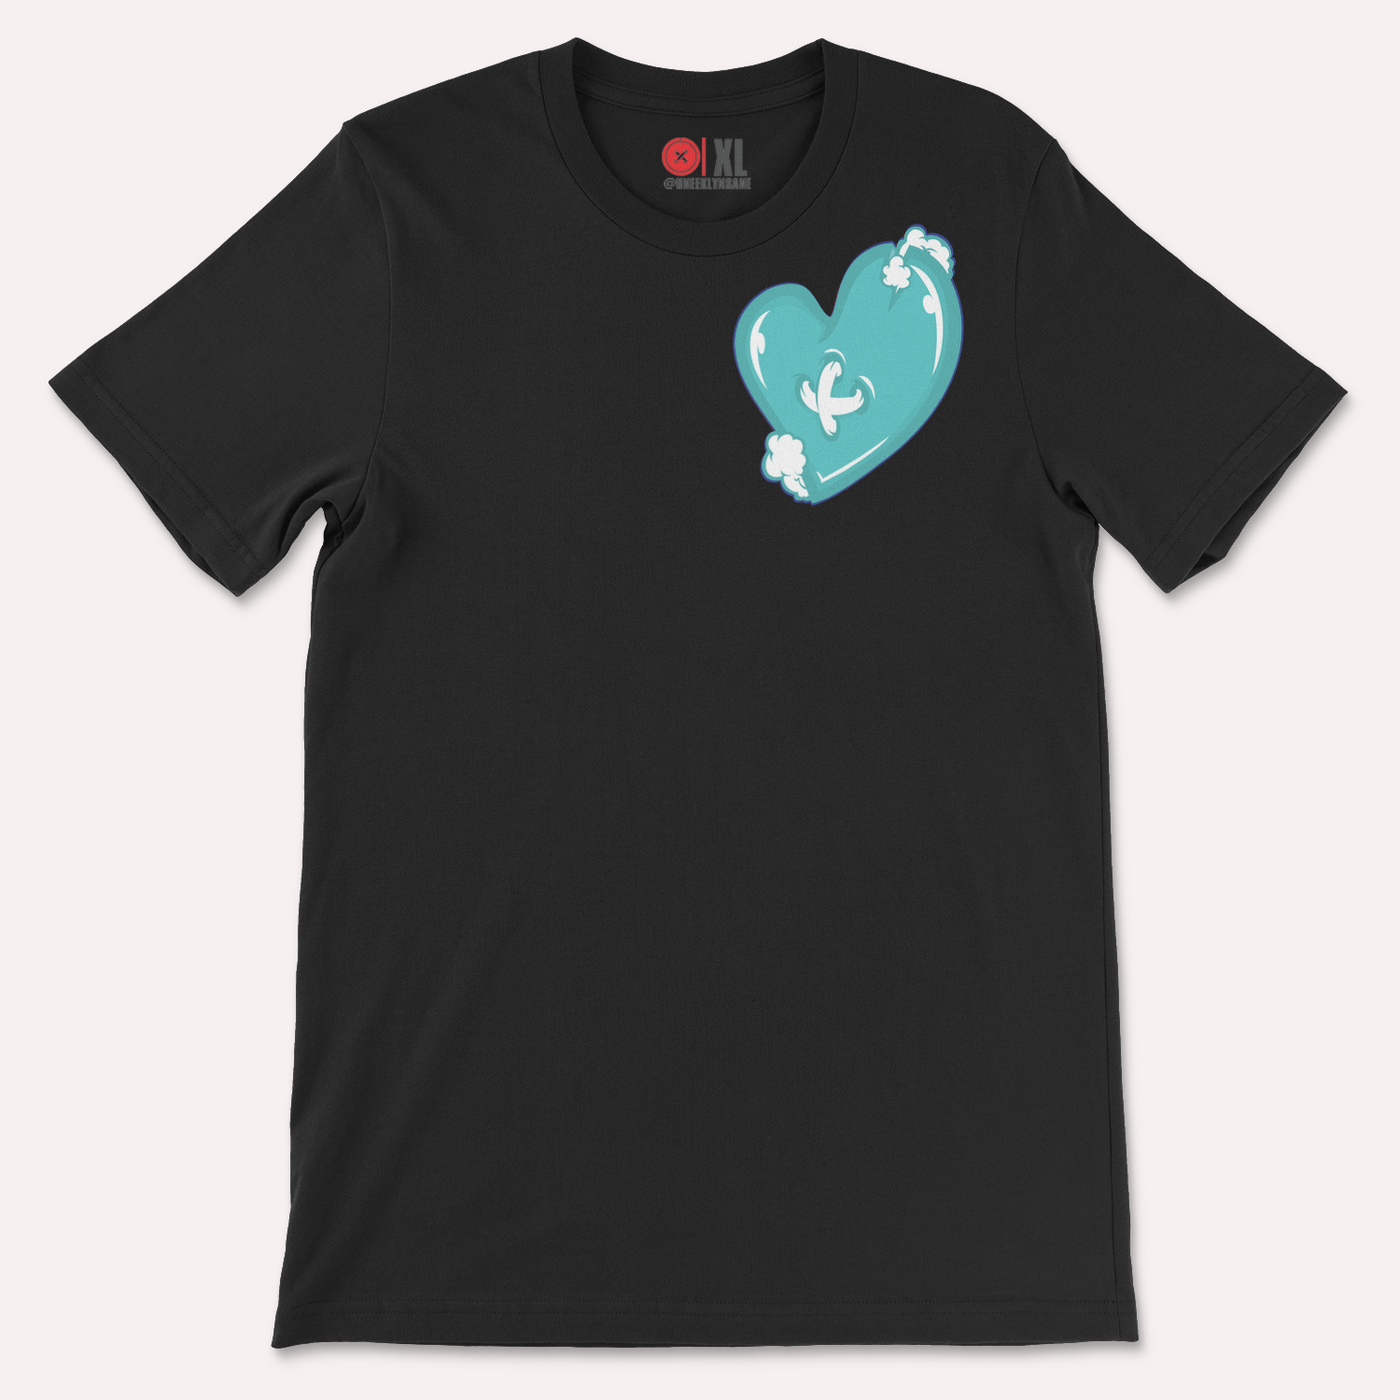 NSANE Heart T (Red Pink Royal Teal) - Unique Sweatsuits, hats, tees, shorts, hoodies, Outwear & accessories online | Uneekly Nsane